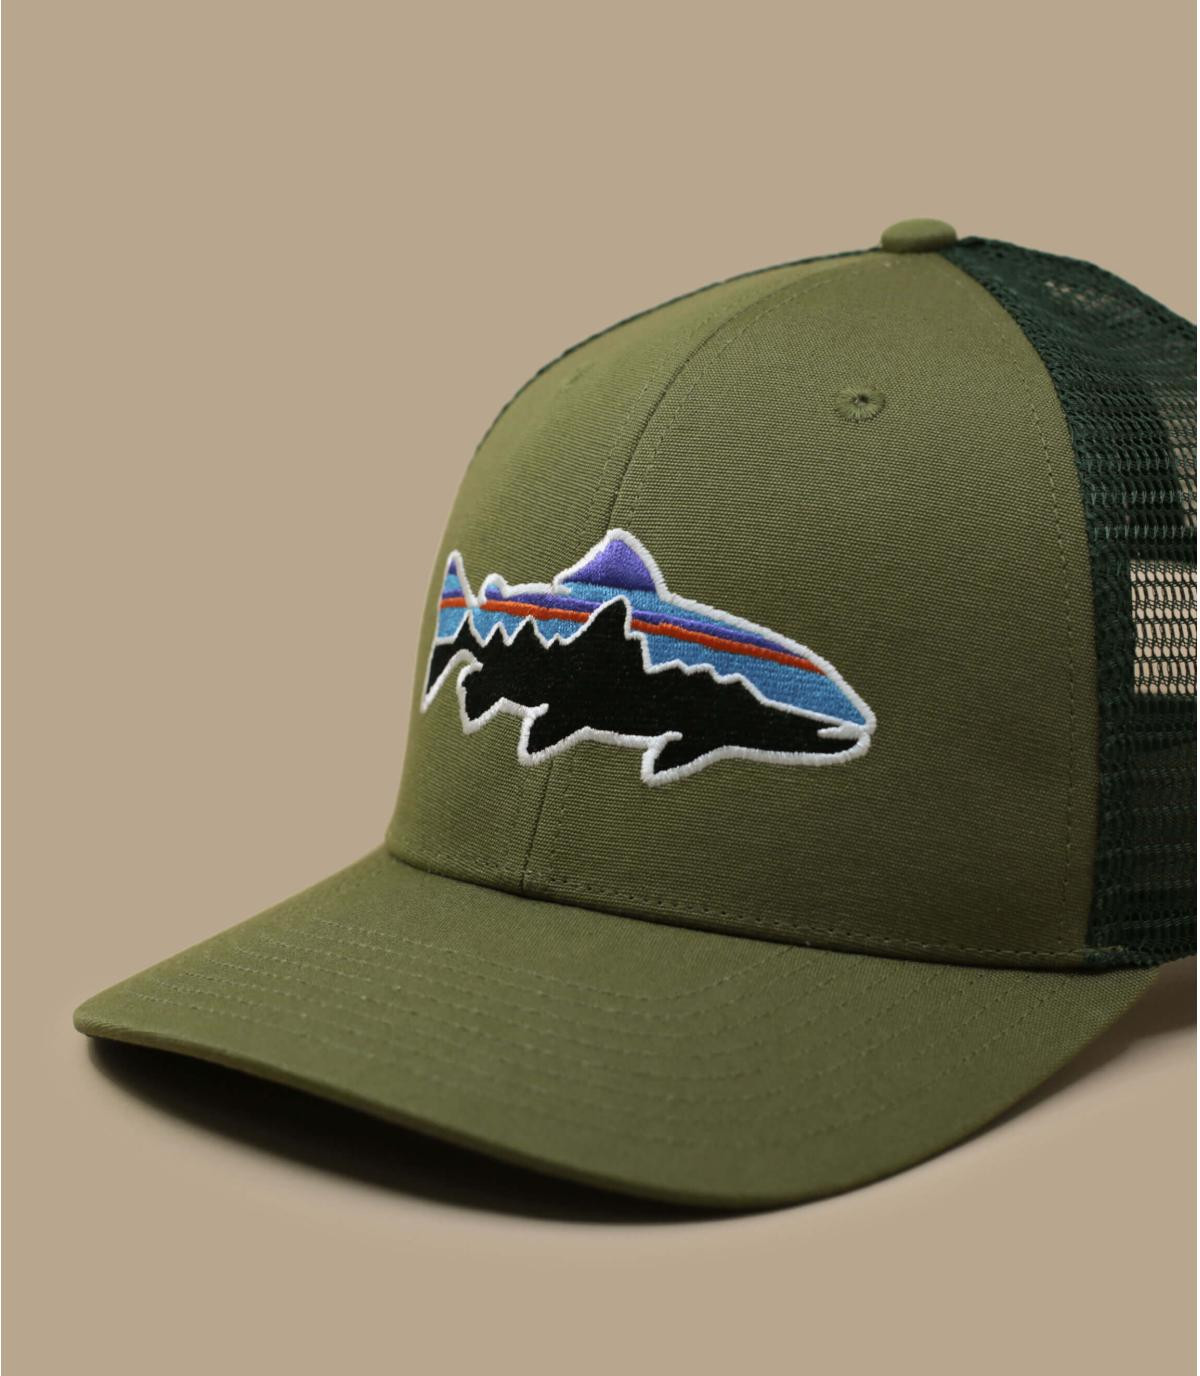 olive trout trucker cap - Fitz Roy Trout Trucker wyoming green Patagonia :  Headict